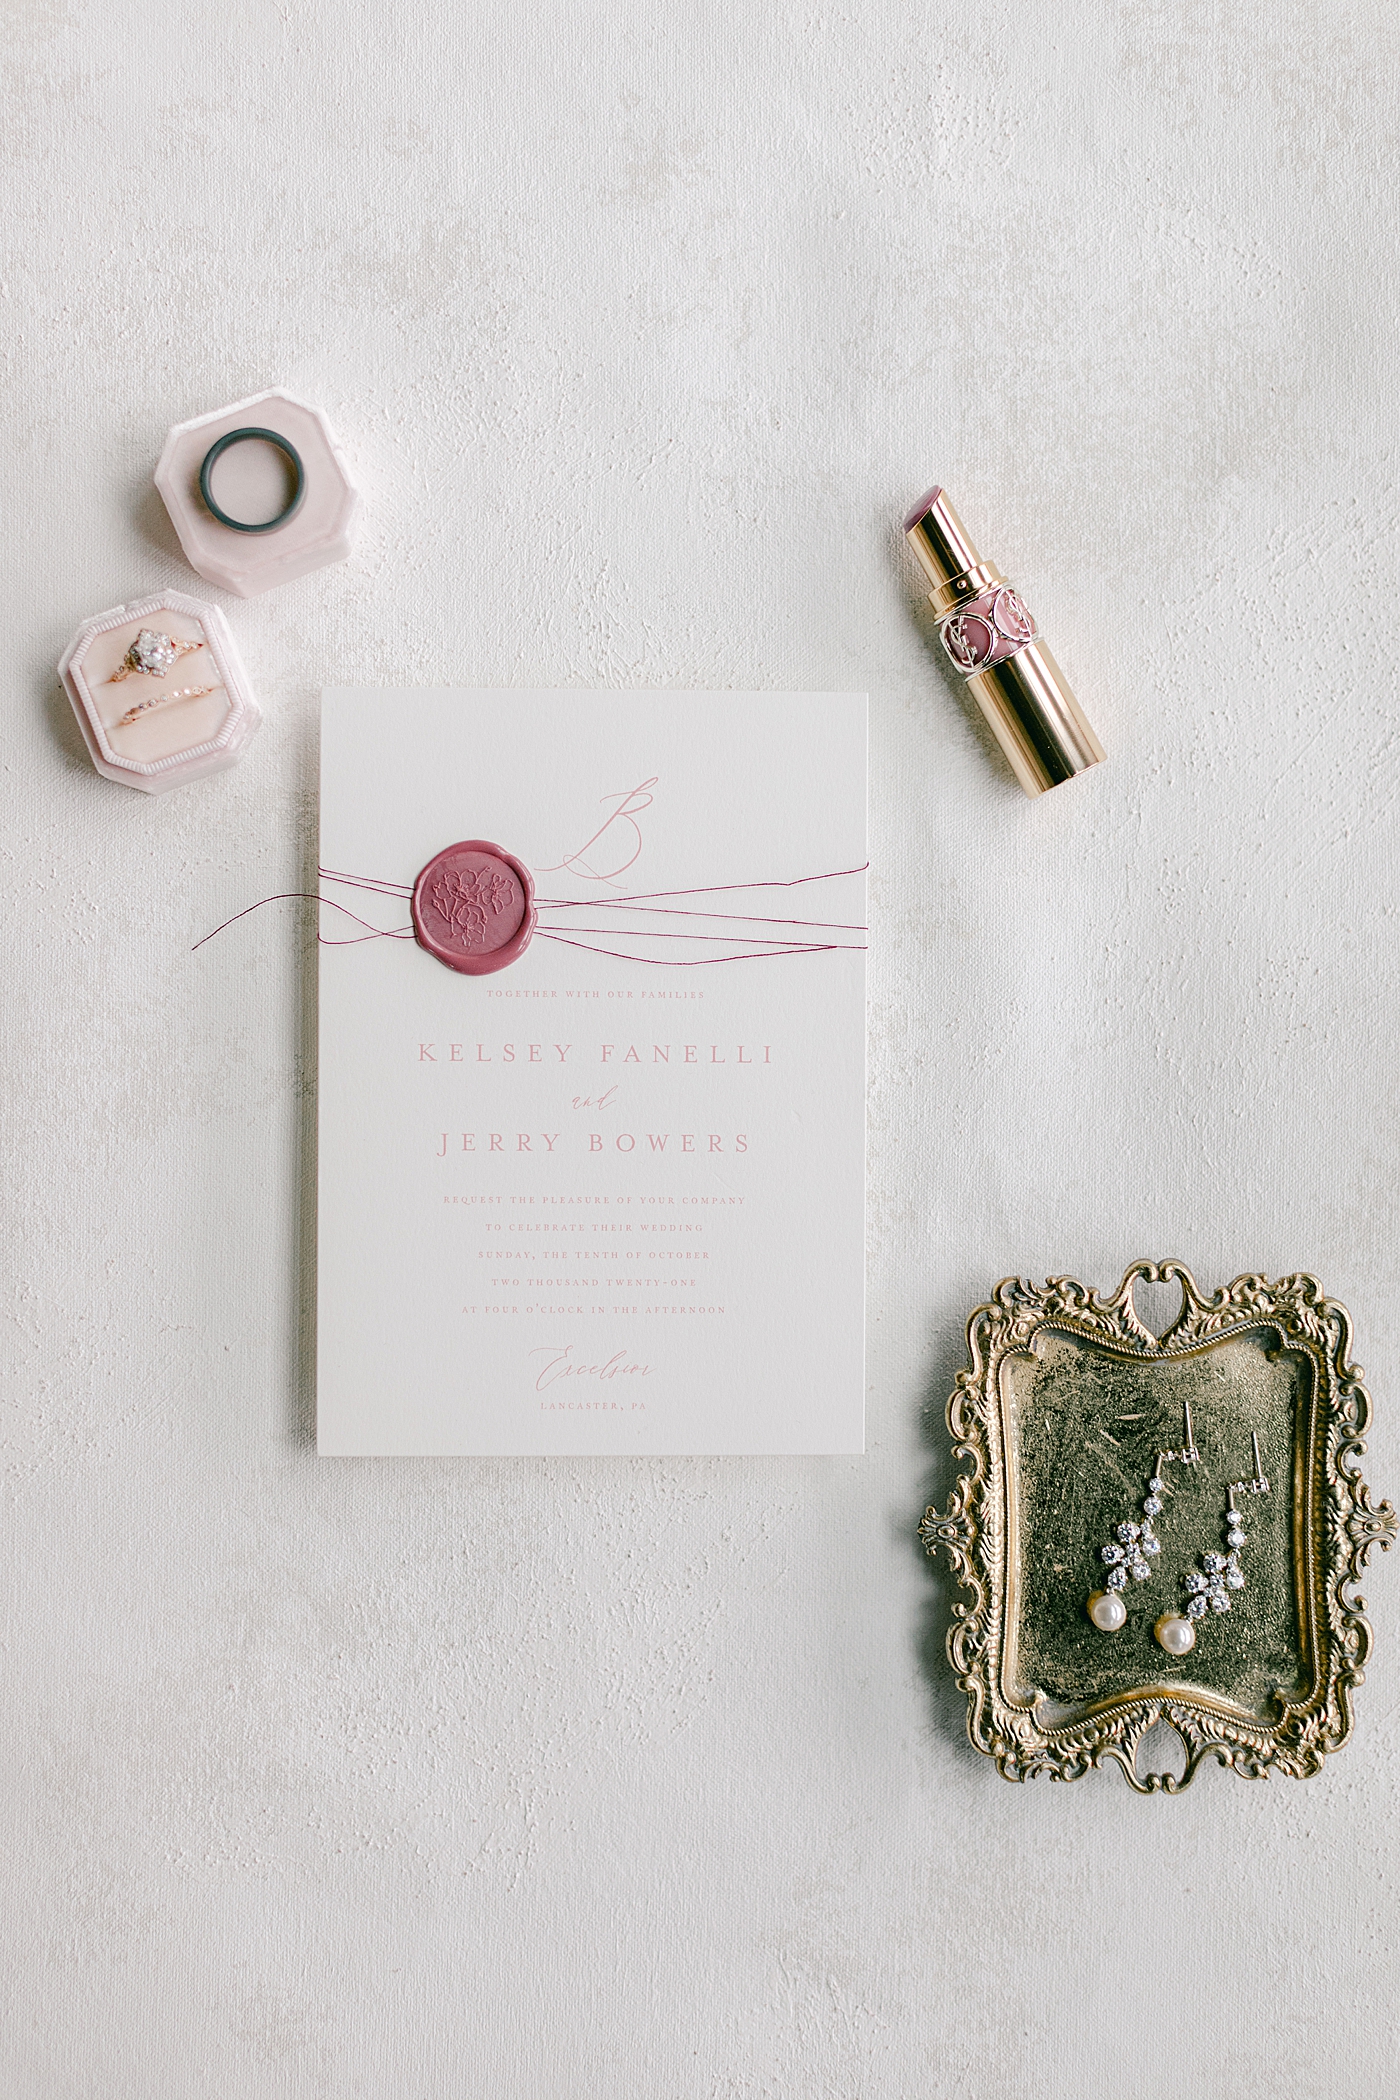 Wedding invitation styled with wedding rings and lipstick | Photo by Hope Helmuth Photography